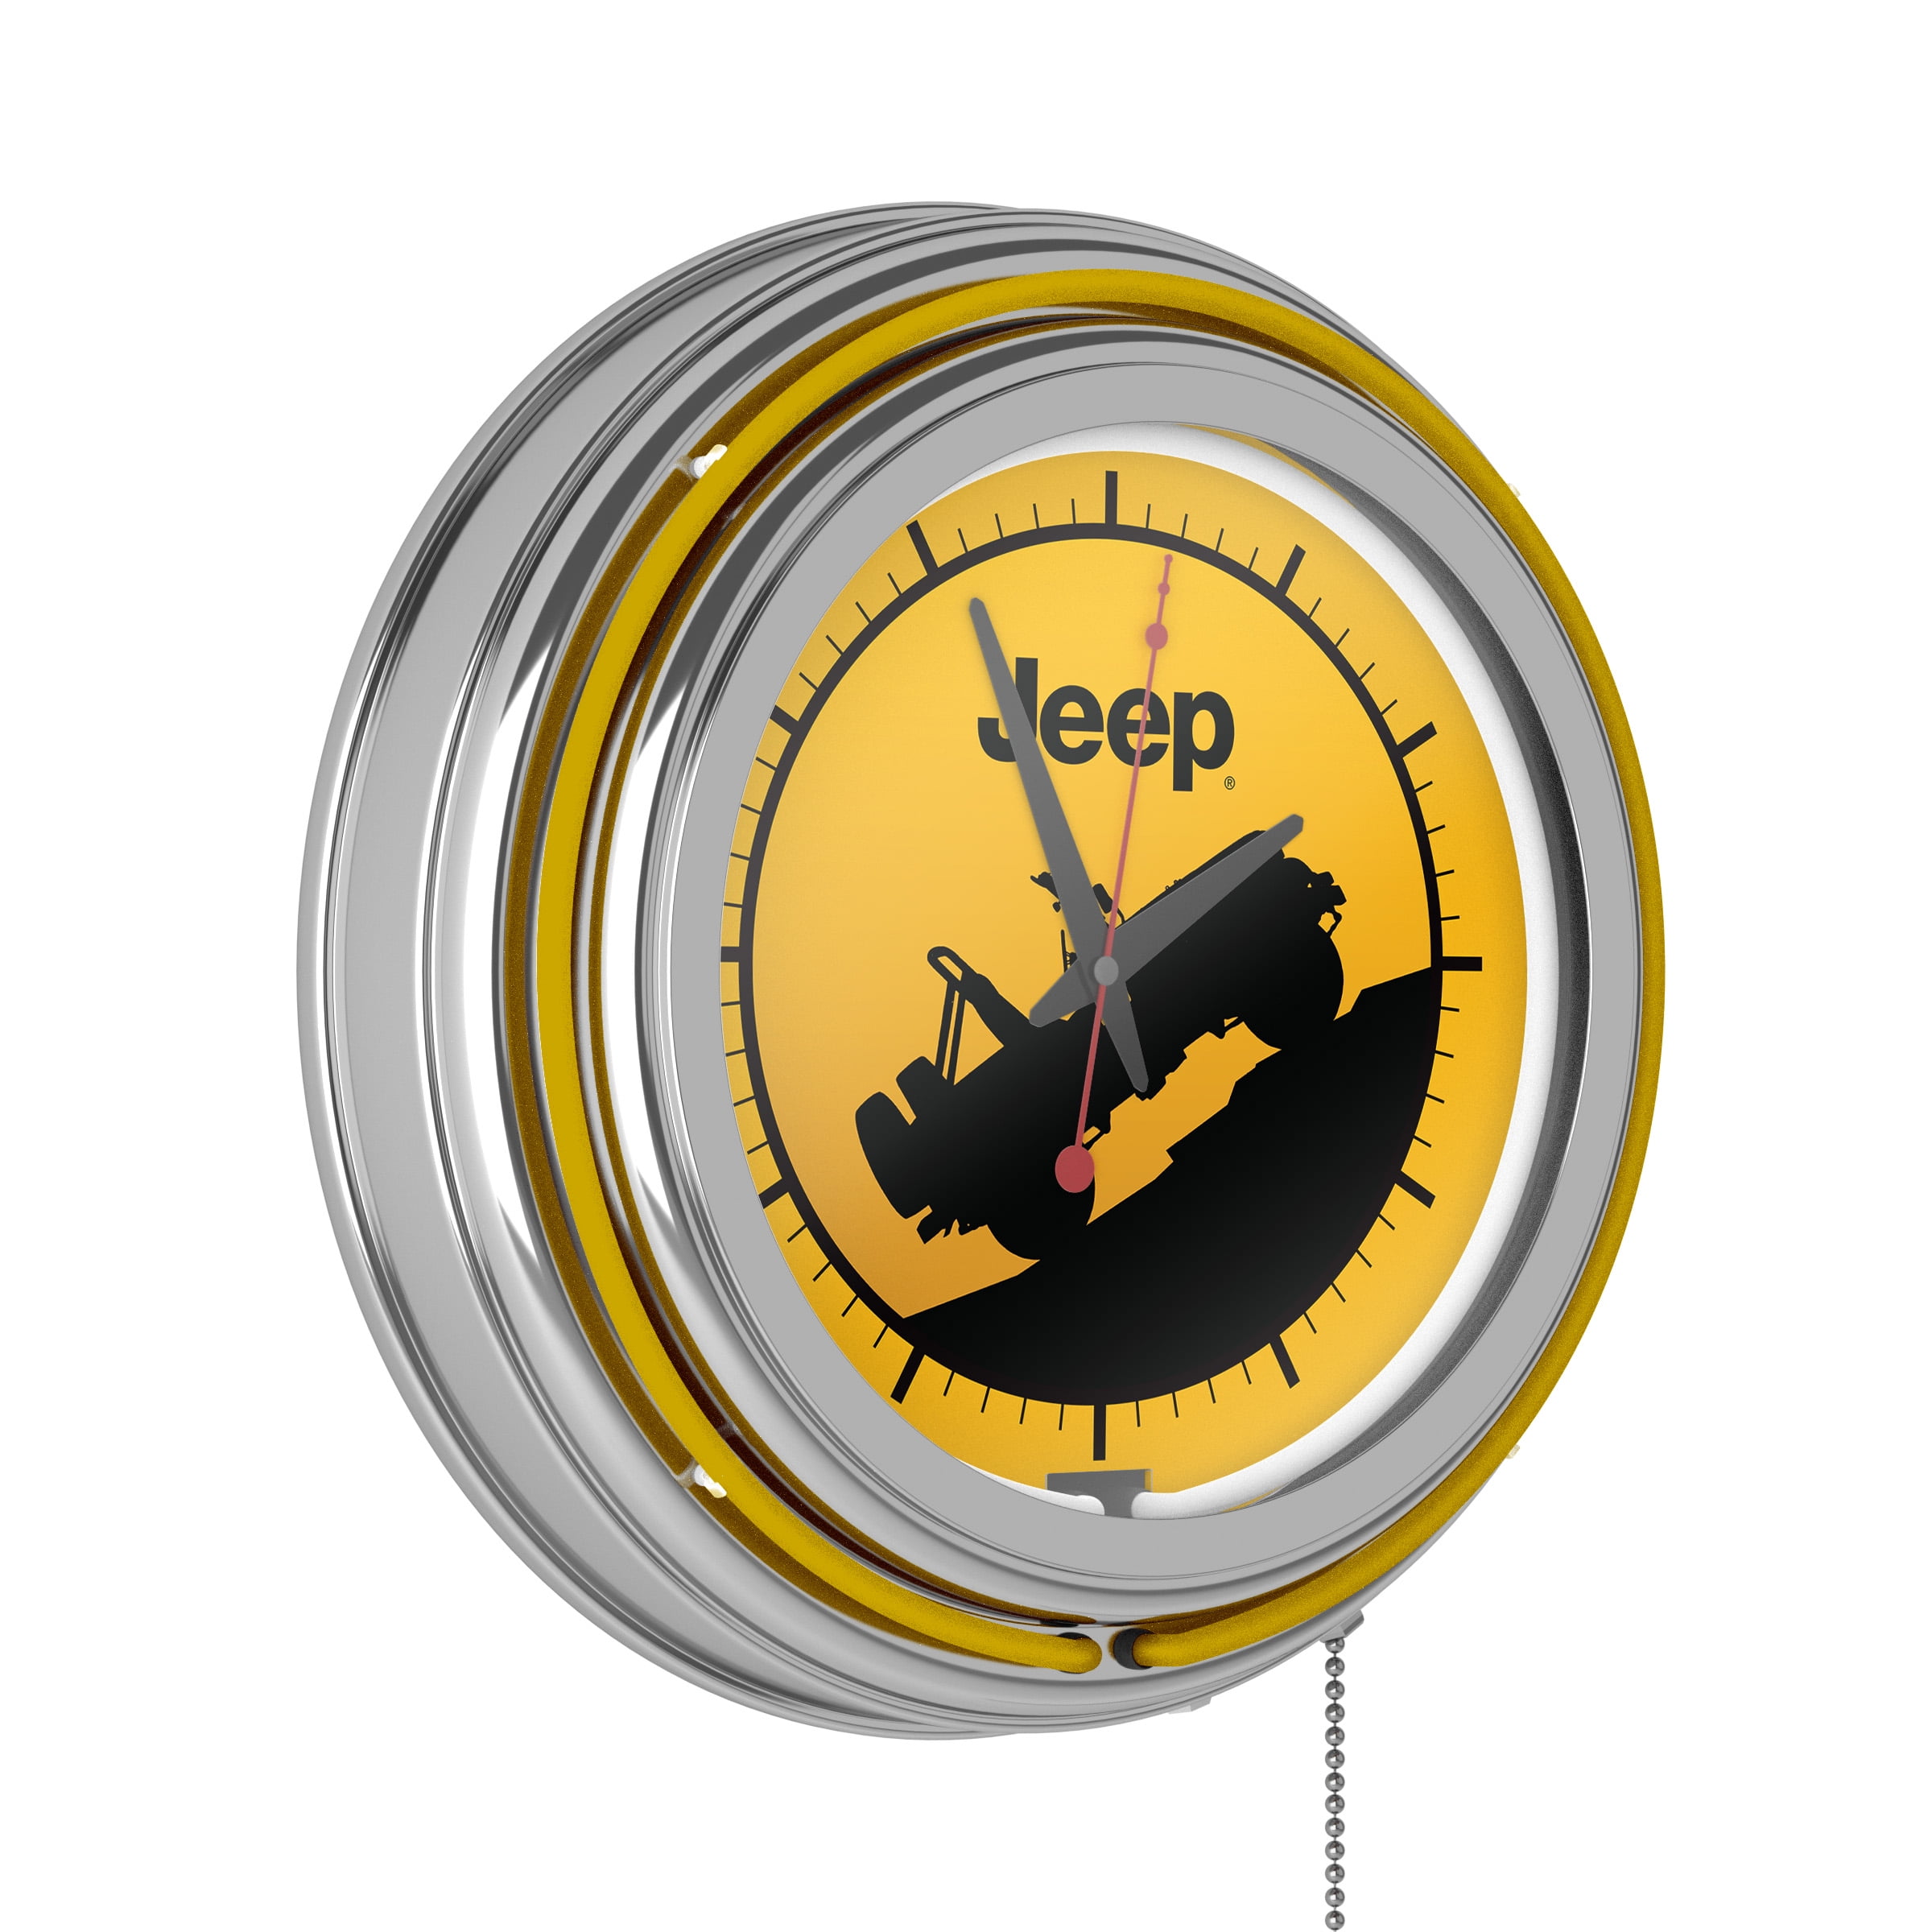 Yellow or Man Cave Accessories Garage Trademark Global Neon Wall Clock-Jeep Grille 2 Double Rung Analog Clock with Pull Chain-Pub